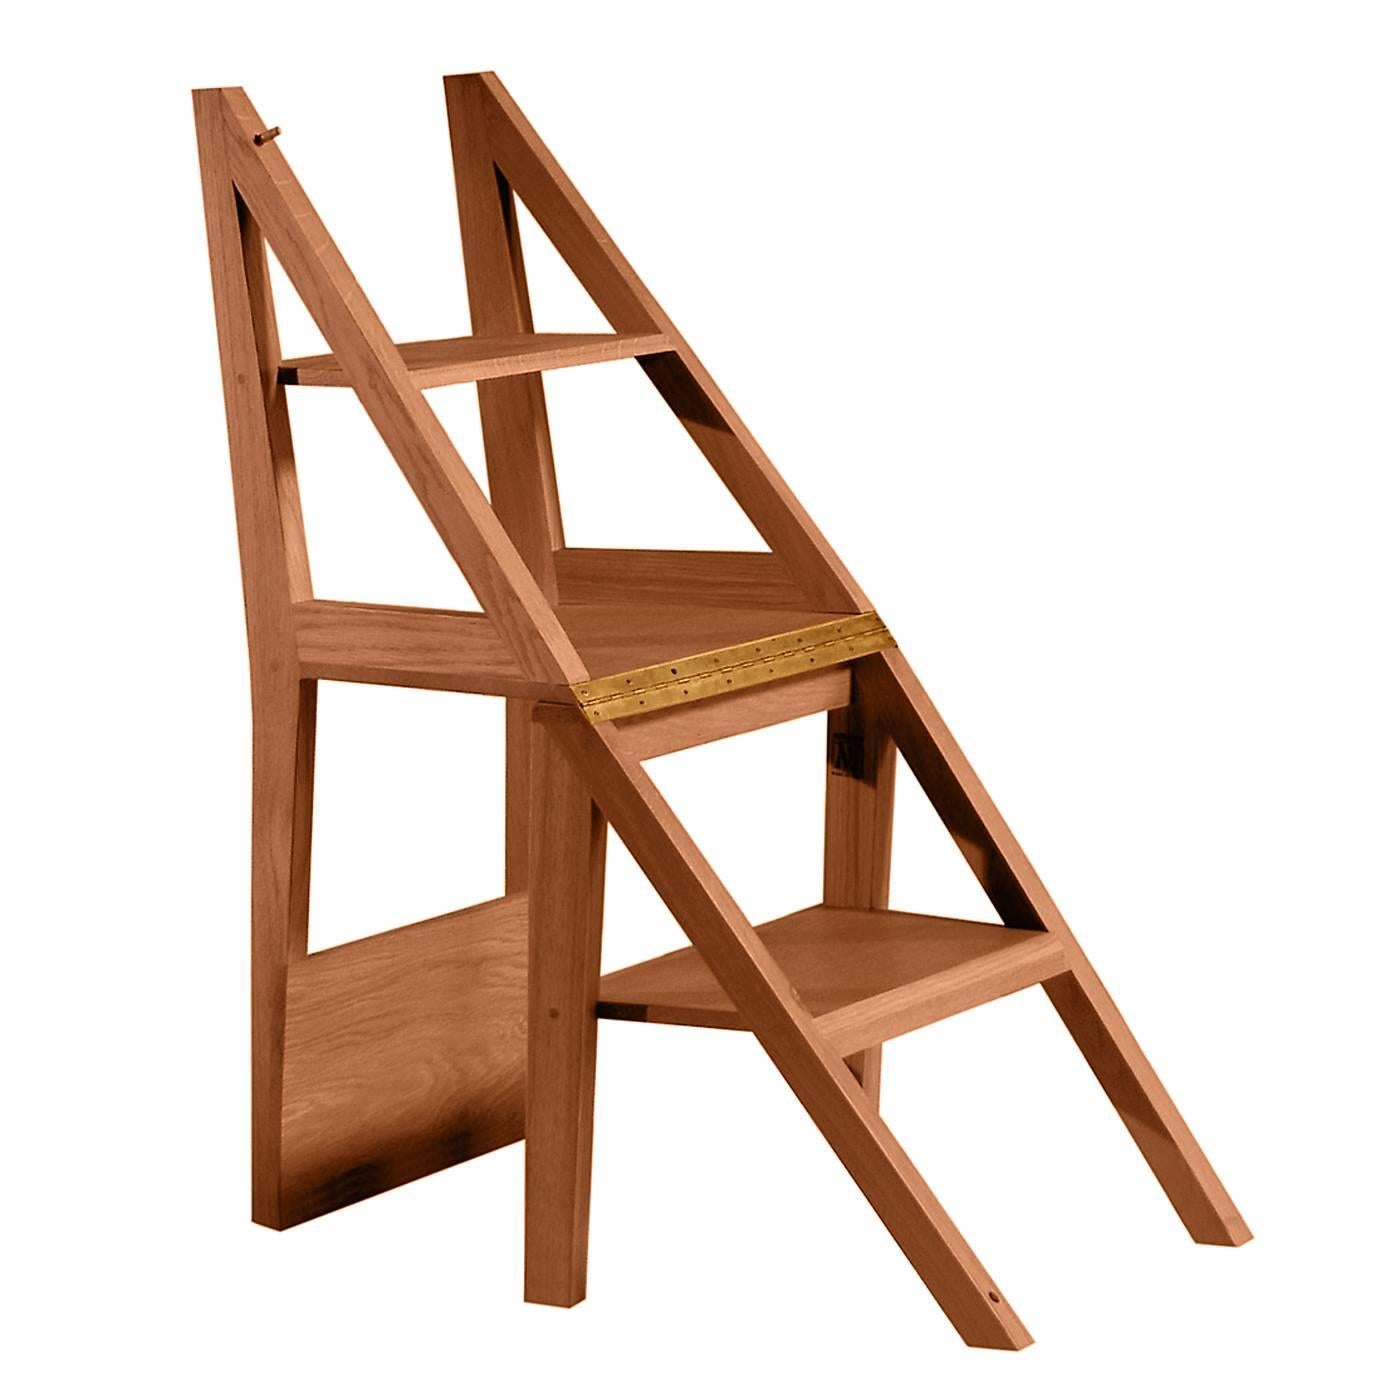 This chair, made entirely in ashwood, is characterized by a sturdy bottom structure with an N shape that allows the shelf located below the seat to become a practical step, making this versatile piece of functional design also a stepladder. The